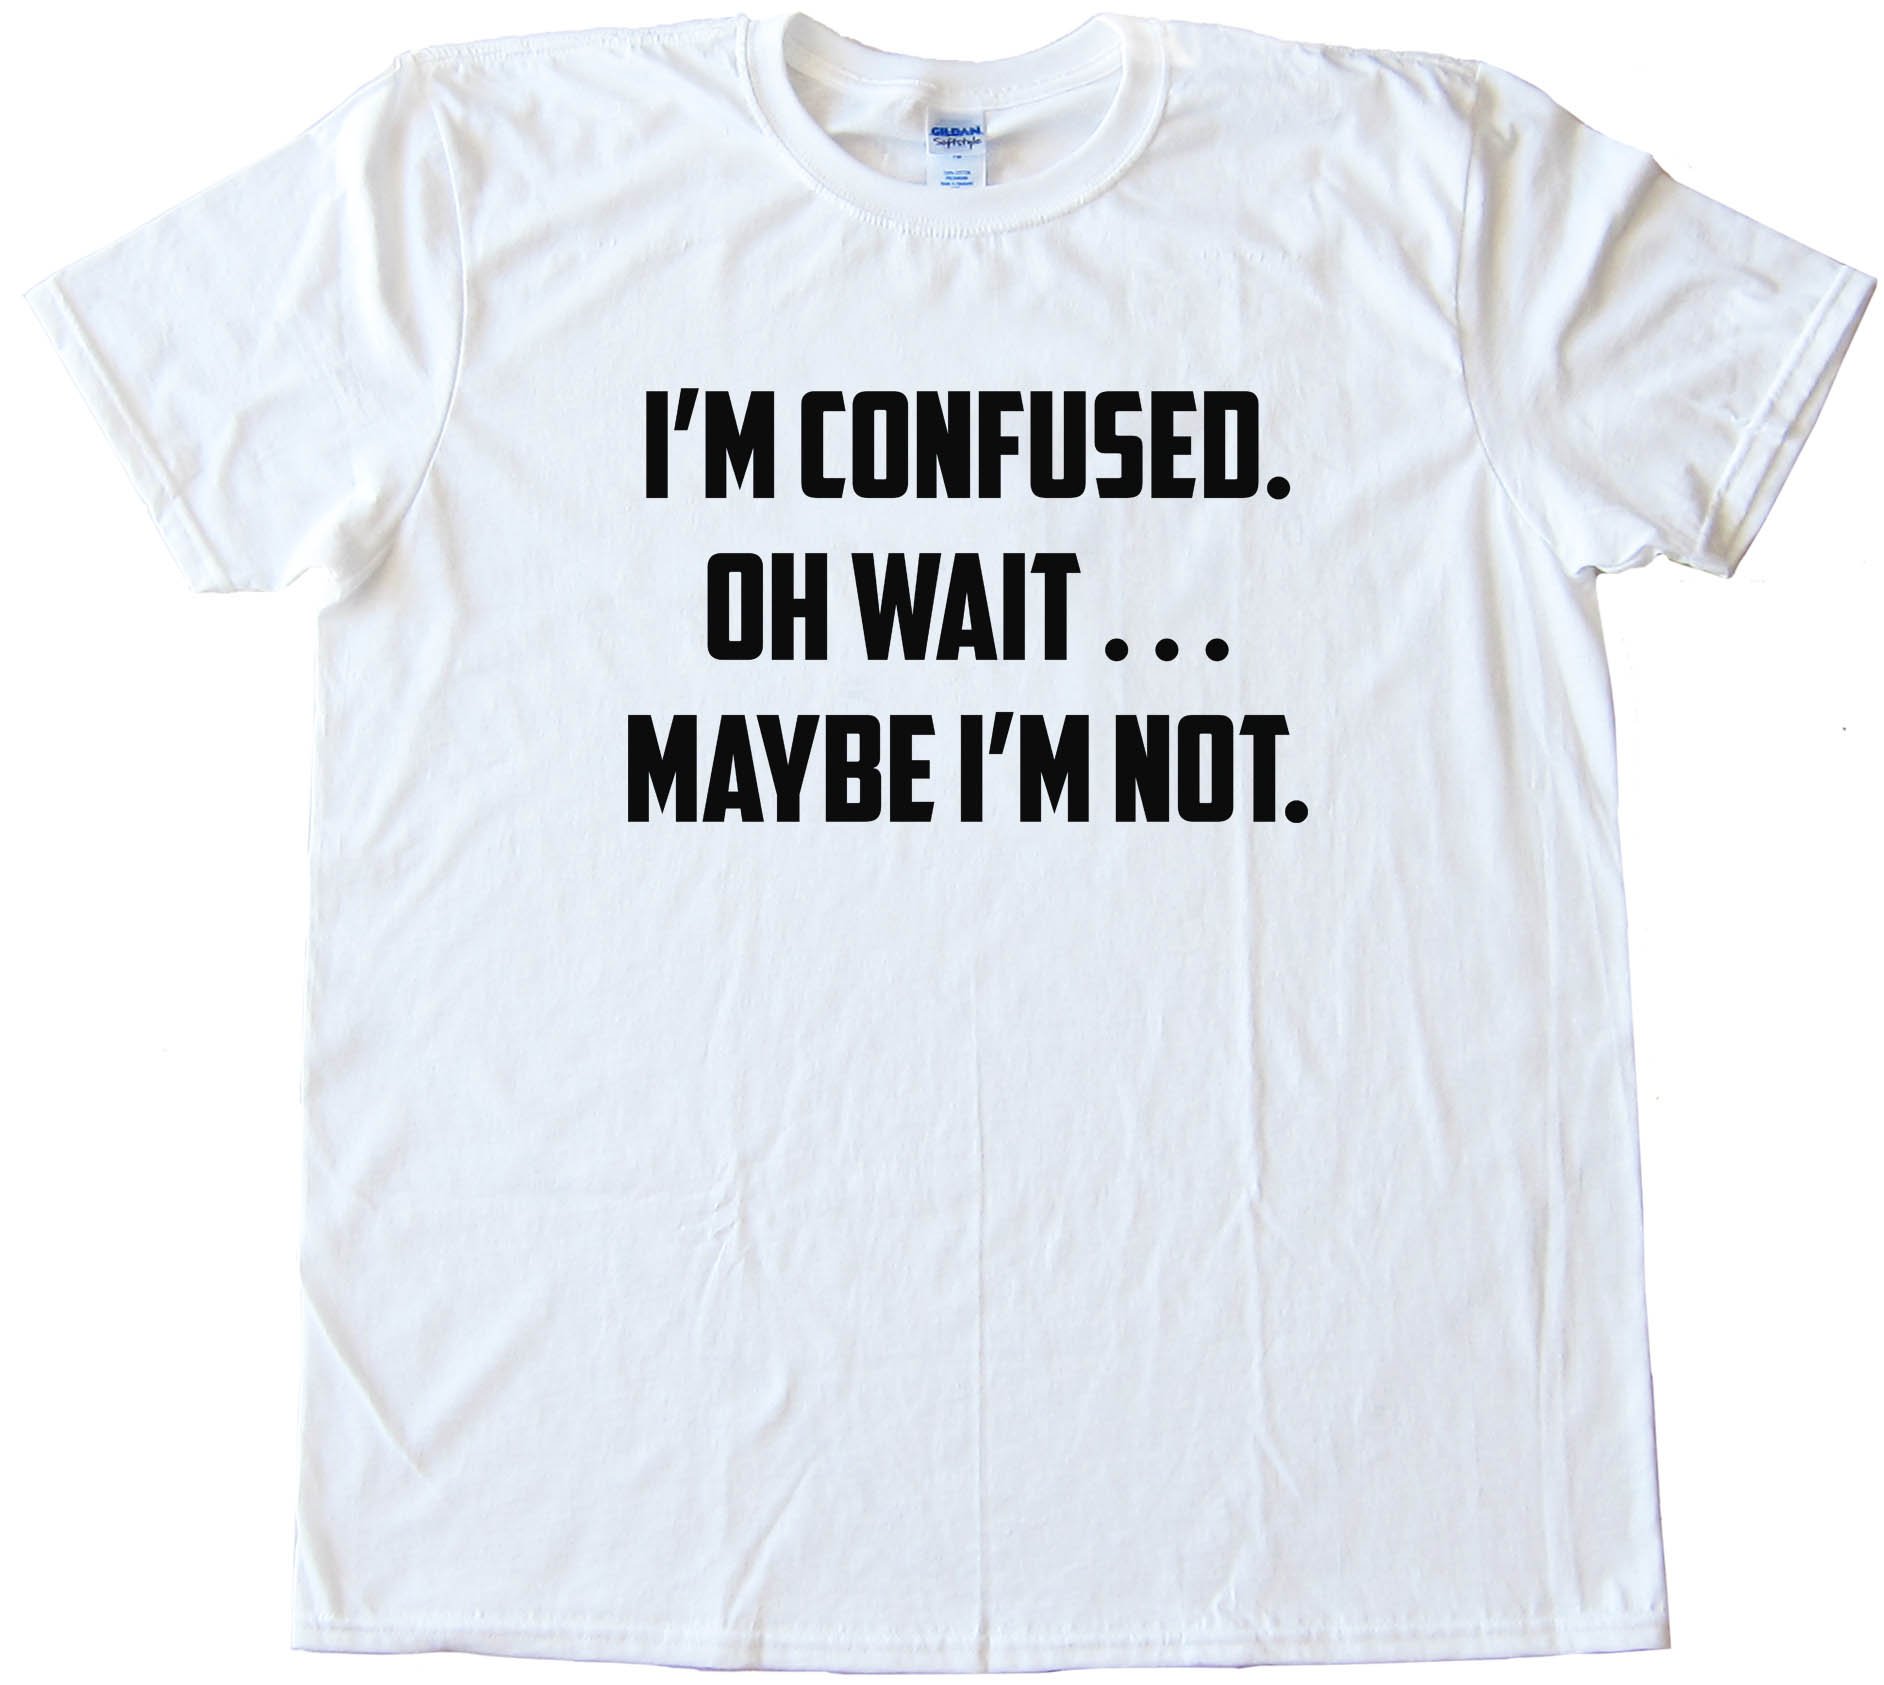 I'M Confused. Oh Wait . . . Maybe I'M Not. - Tee Shirt